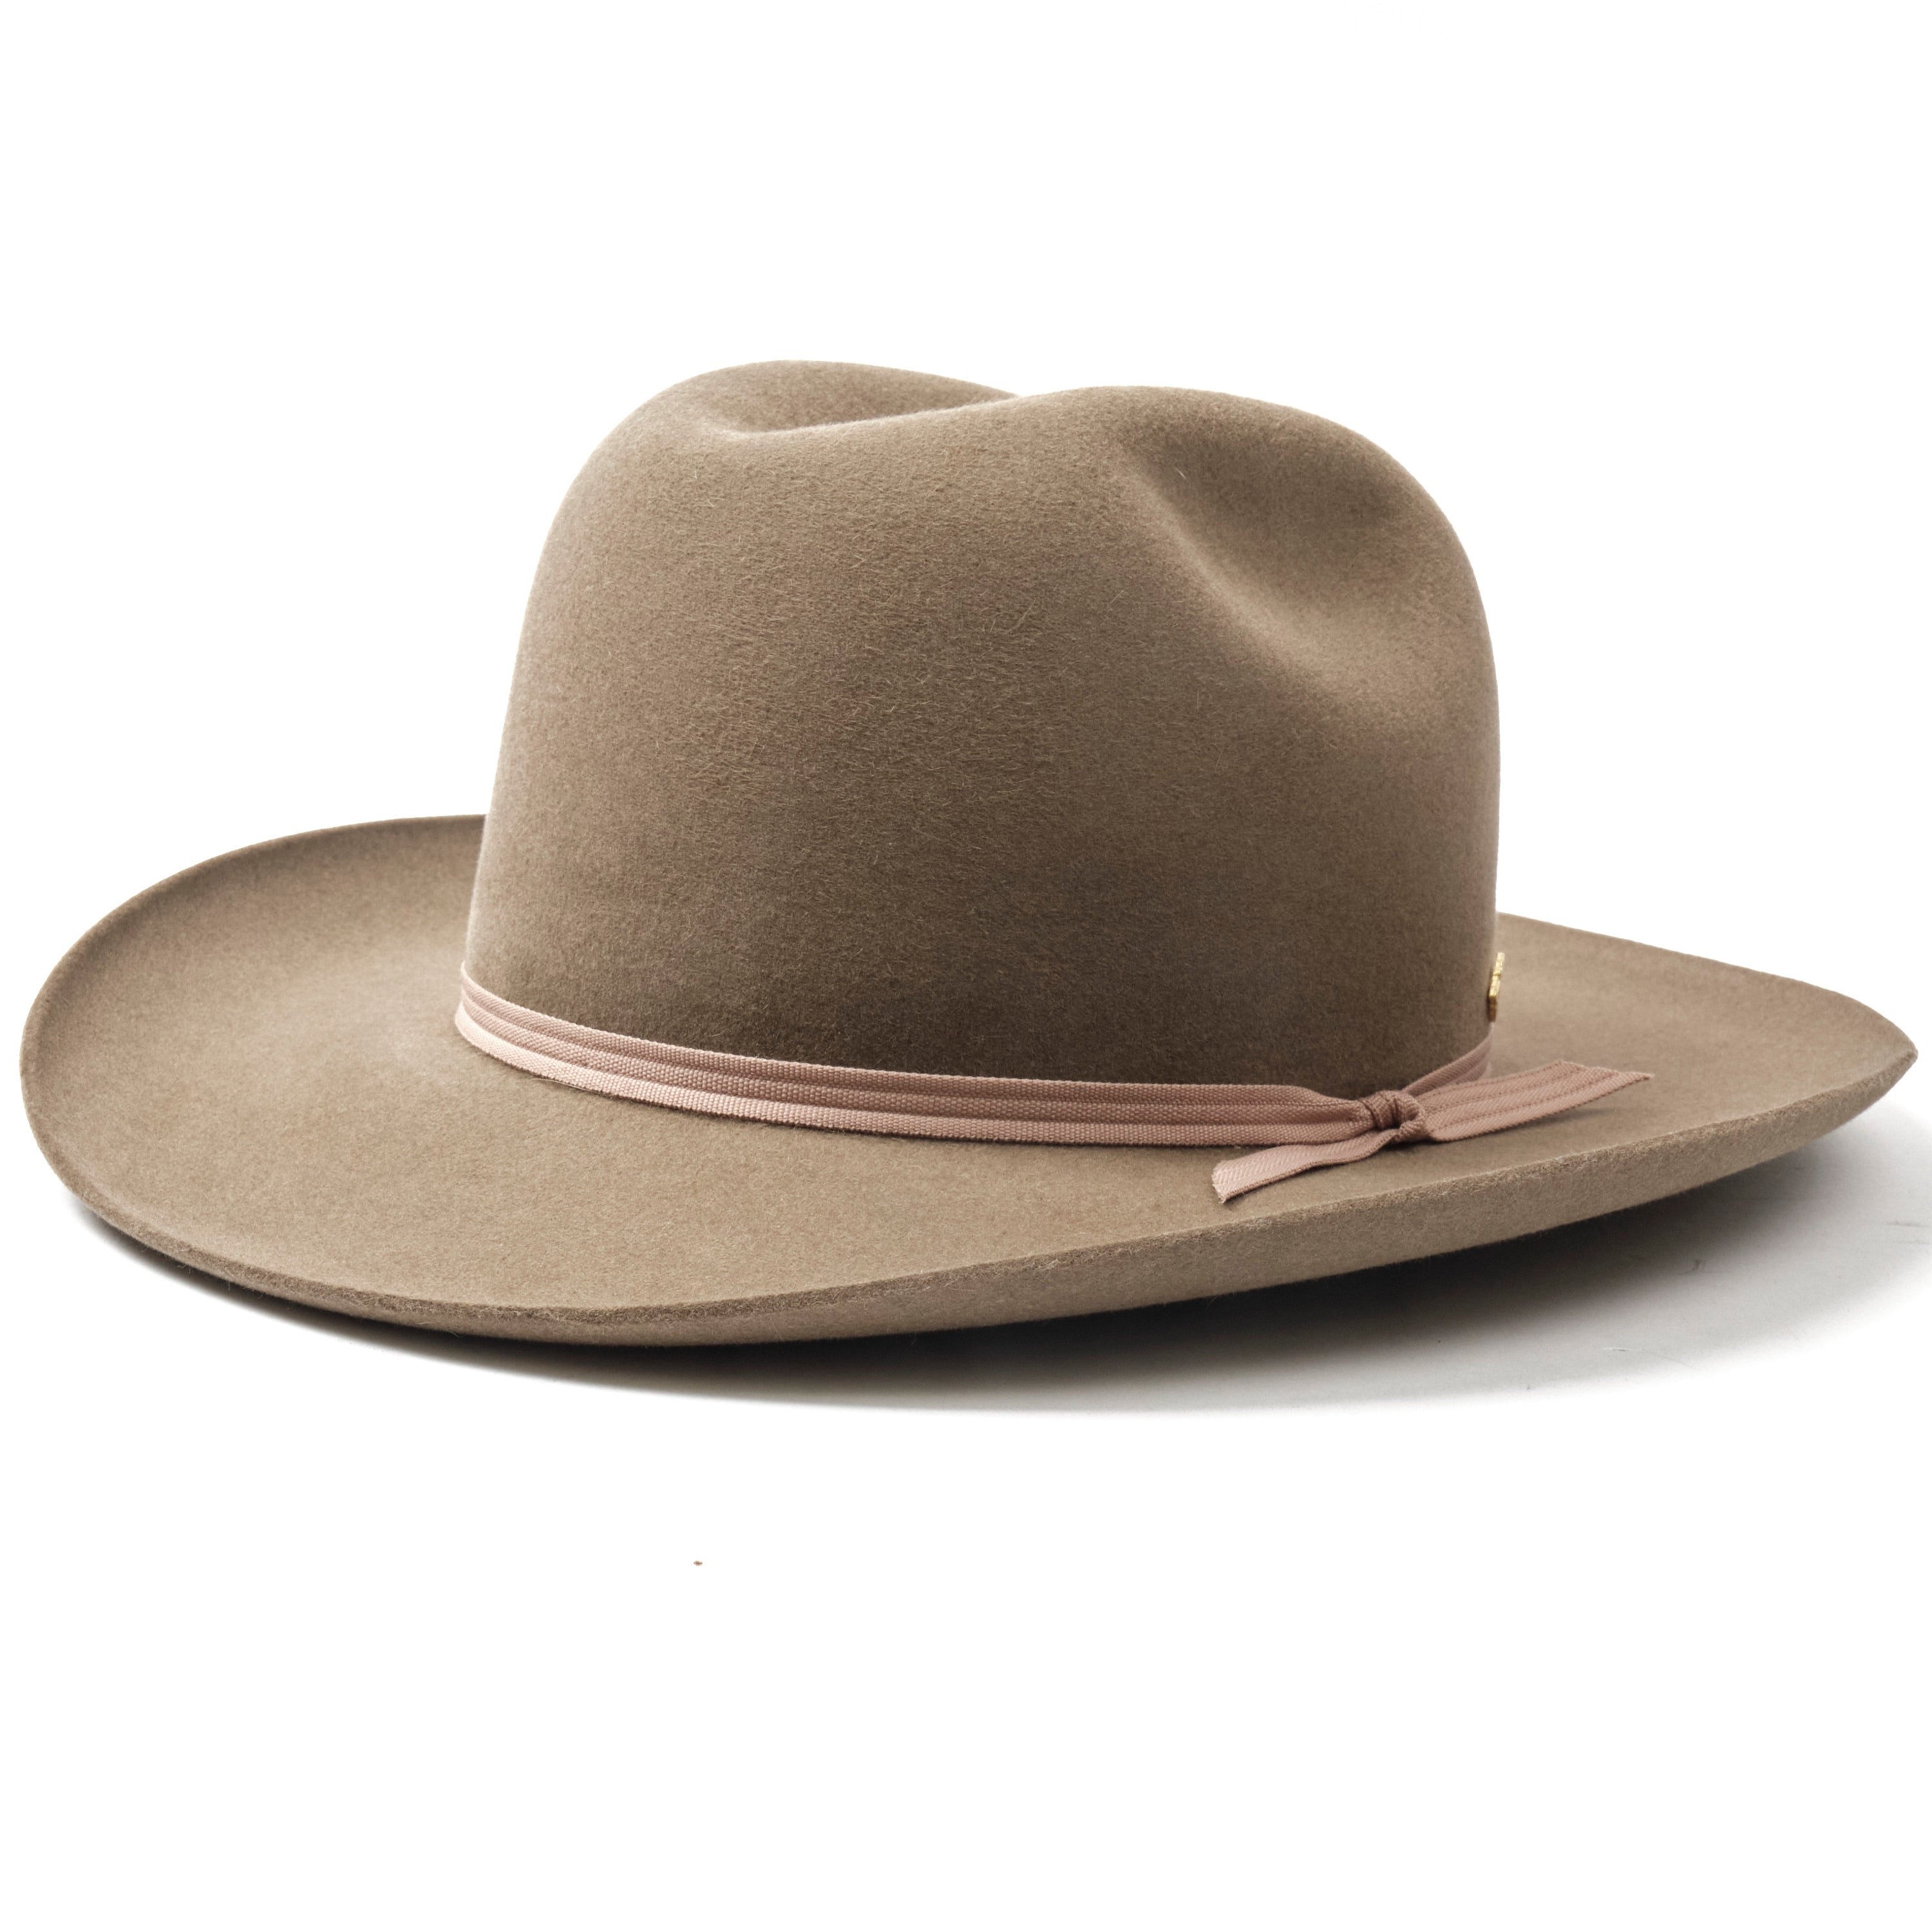 Bowman Hat Co. x Freenote Cloth Town & Country Hat Pecan